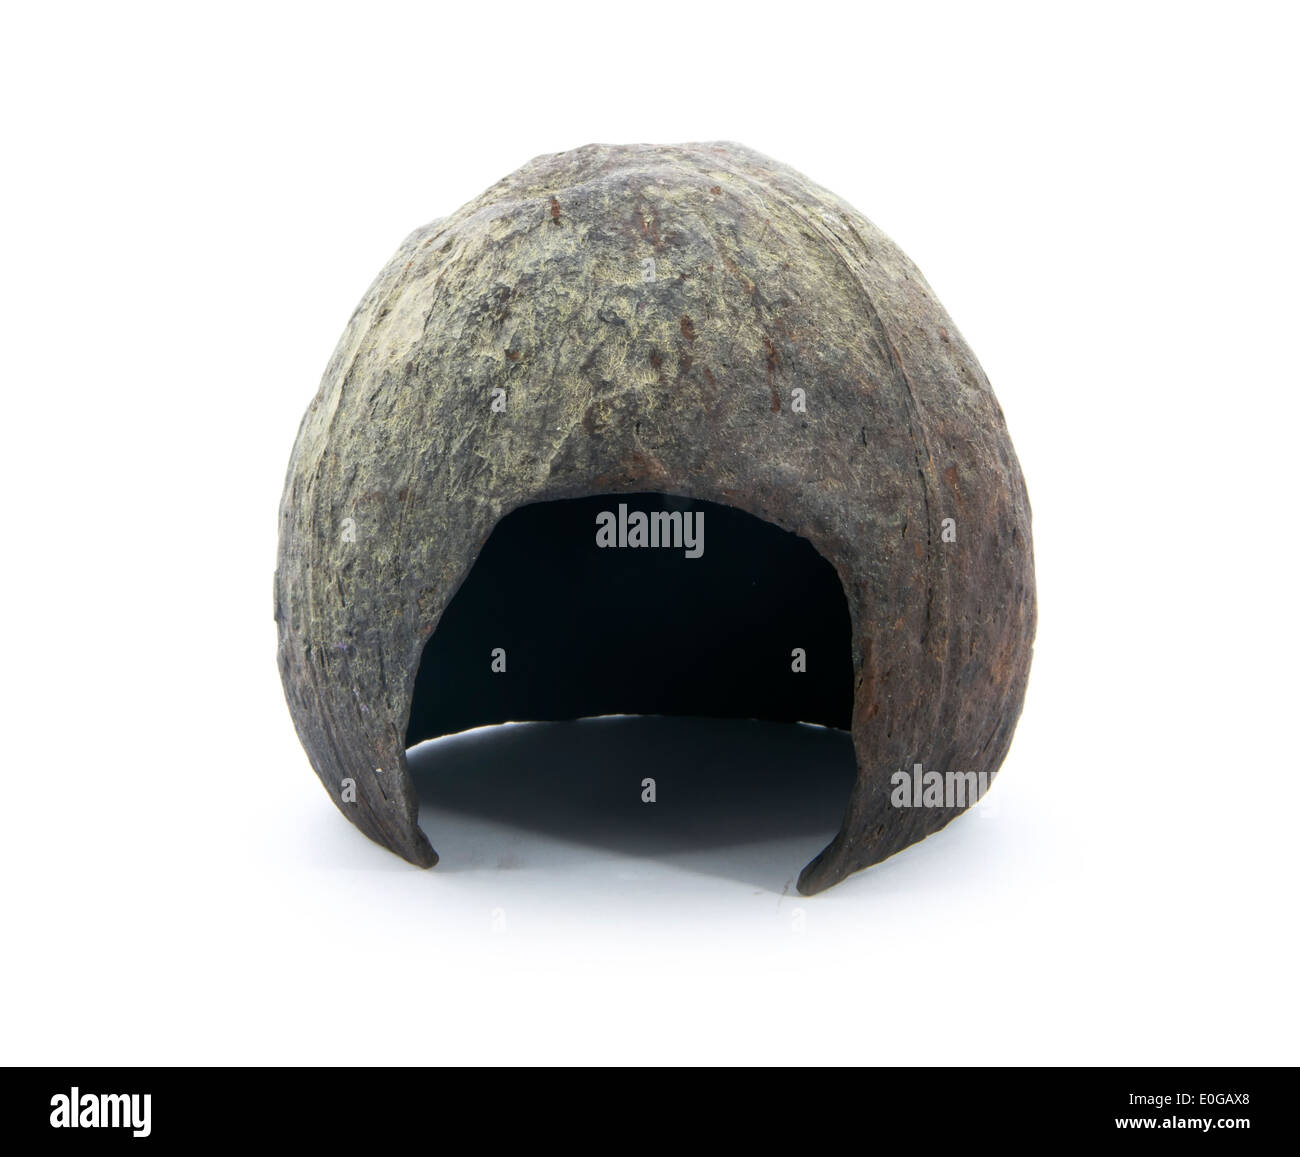 hamster house made of coconut shell isolated on white background Stock Photo